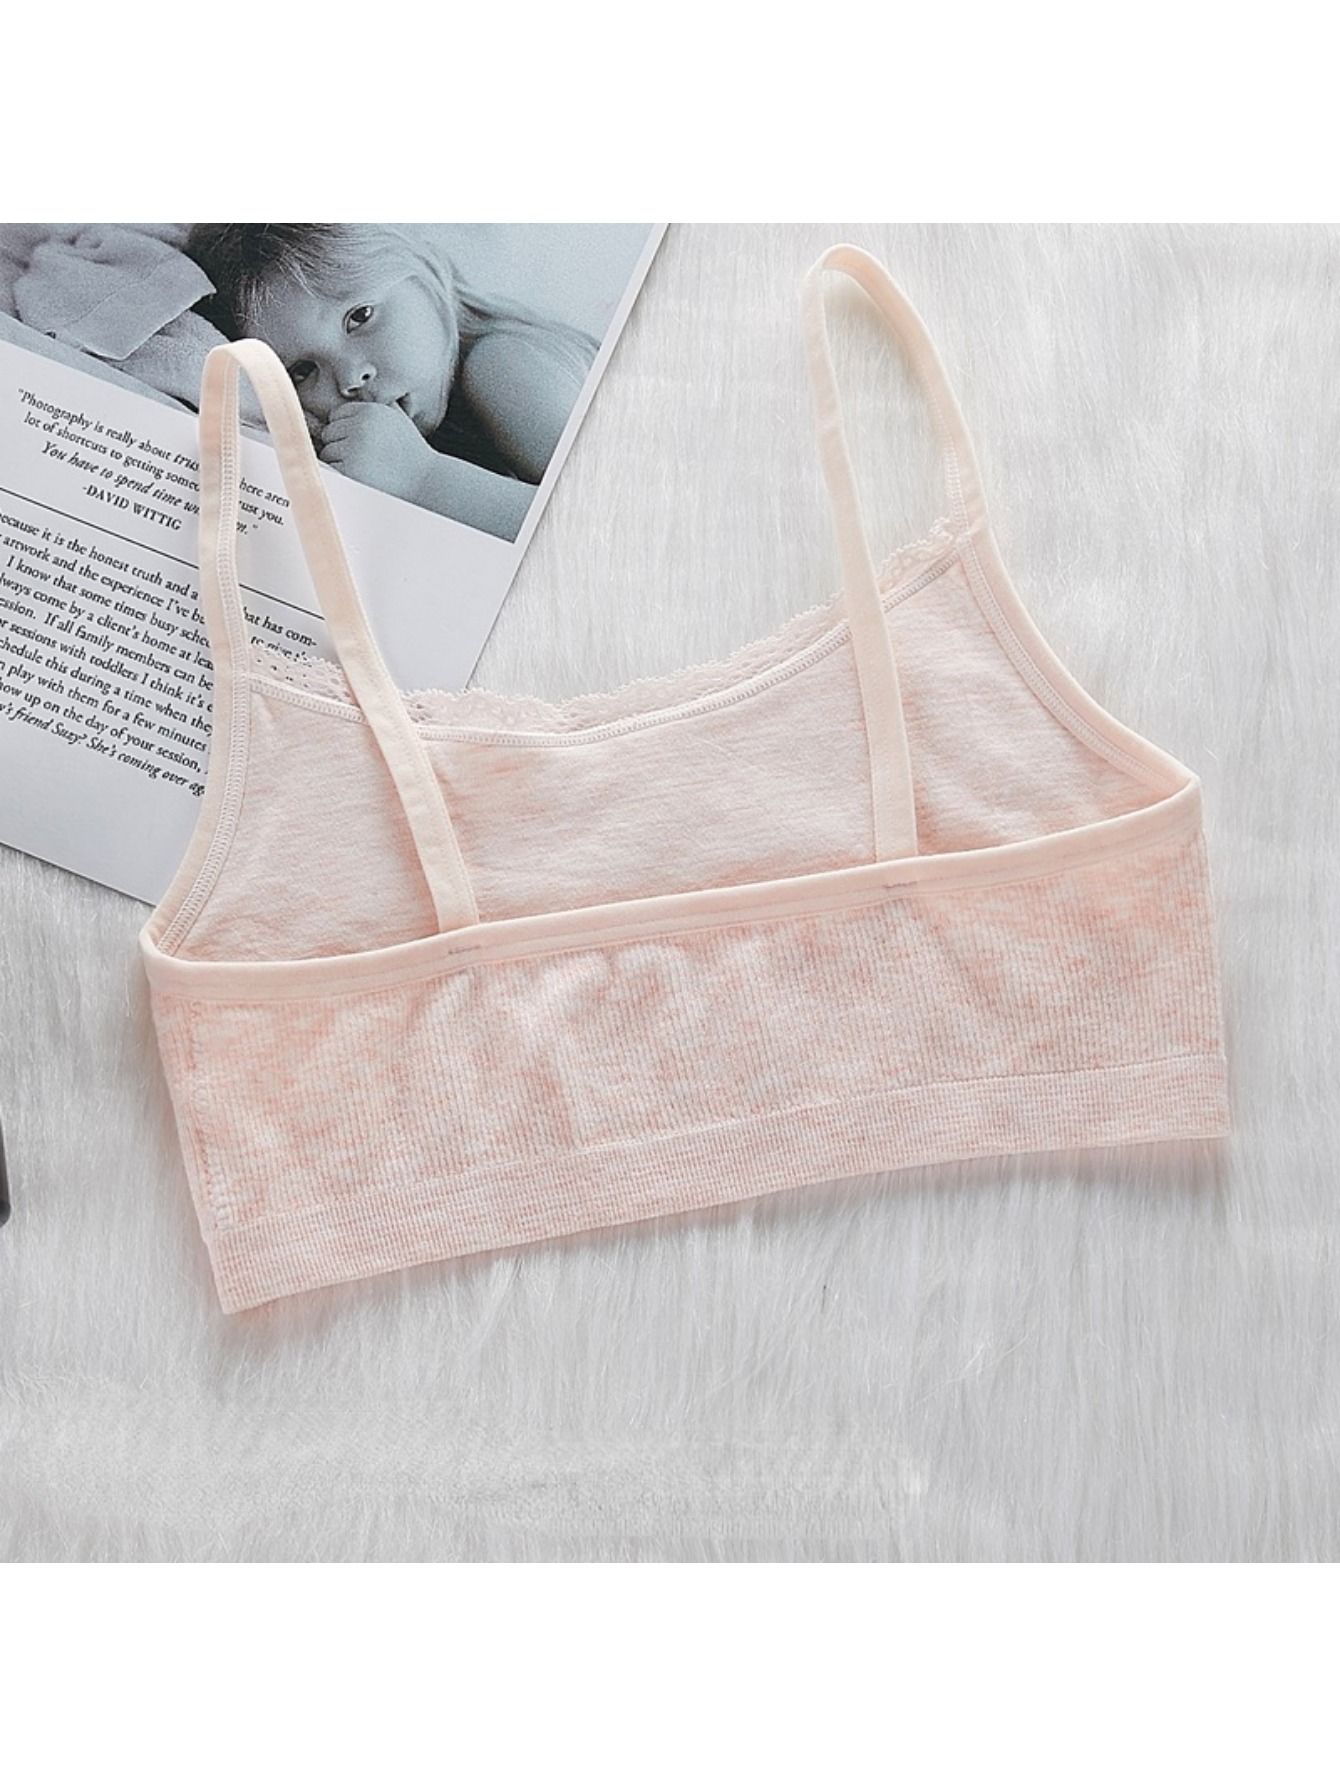 Cute Bras Embroidery No Underwire Bras for Women Solid Color